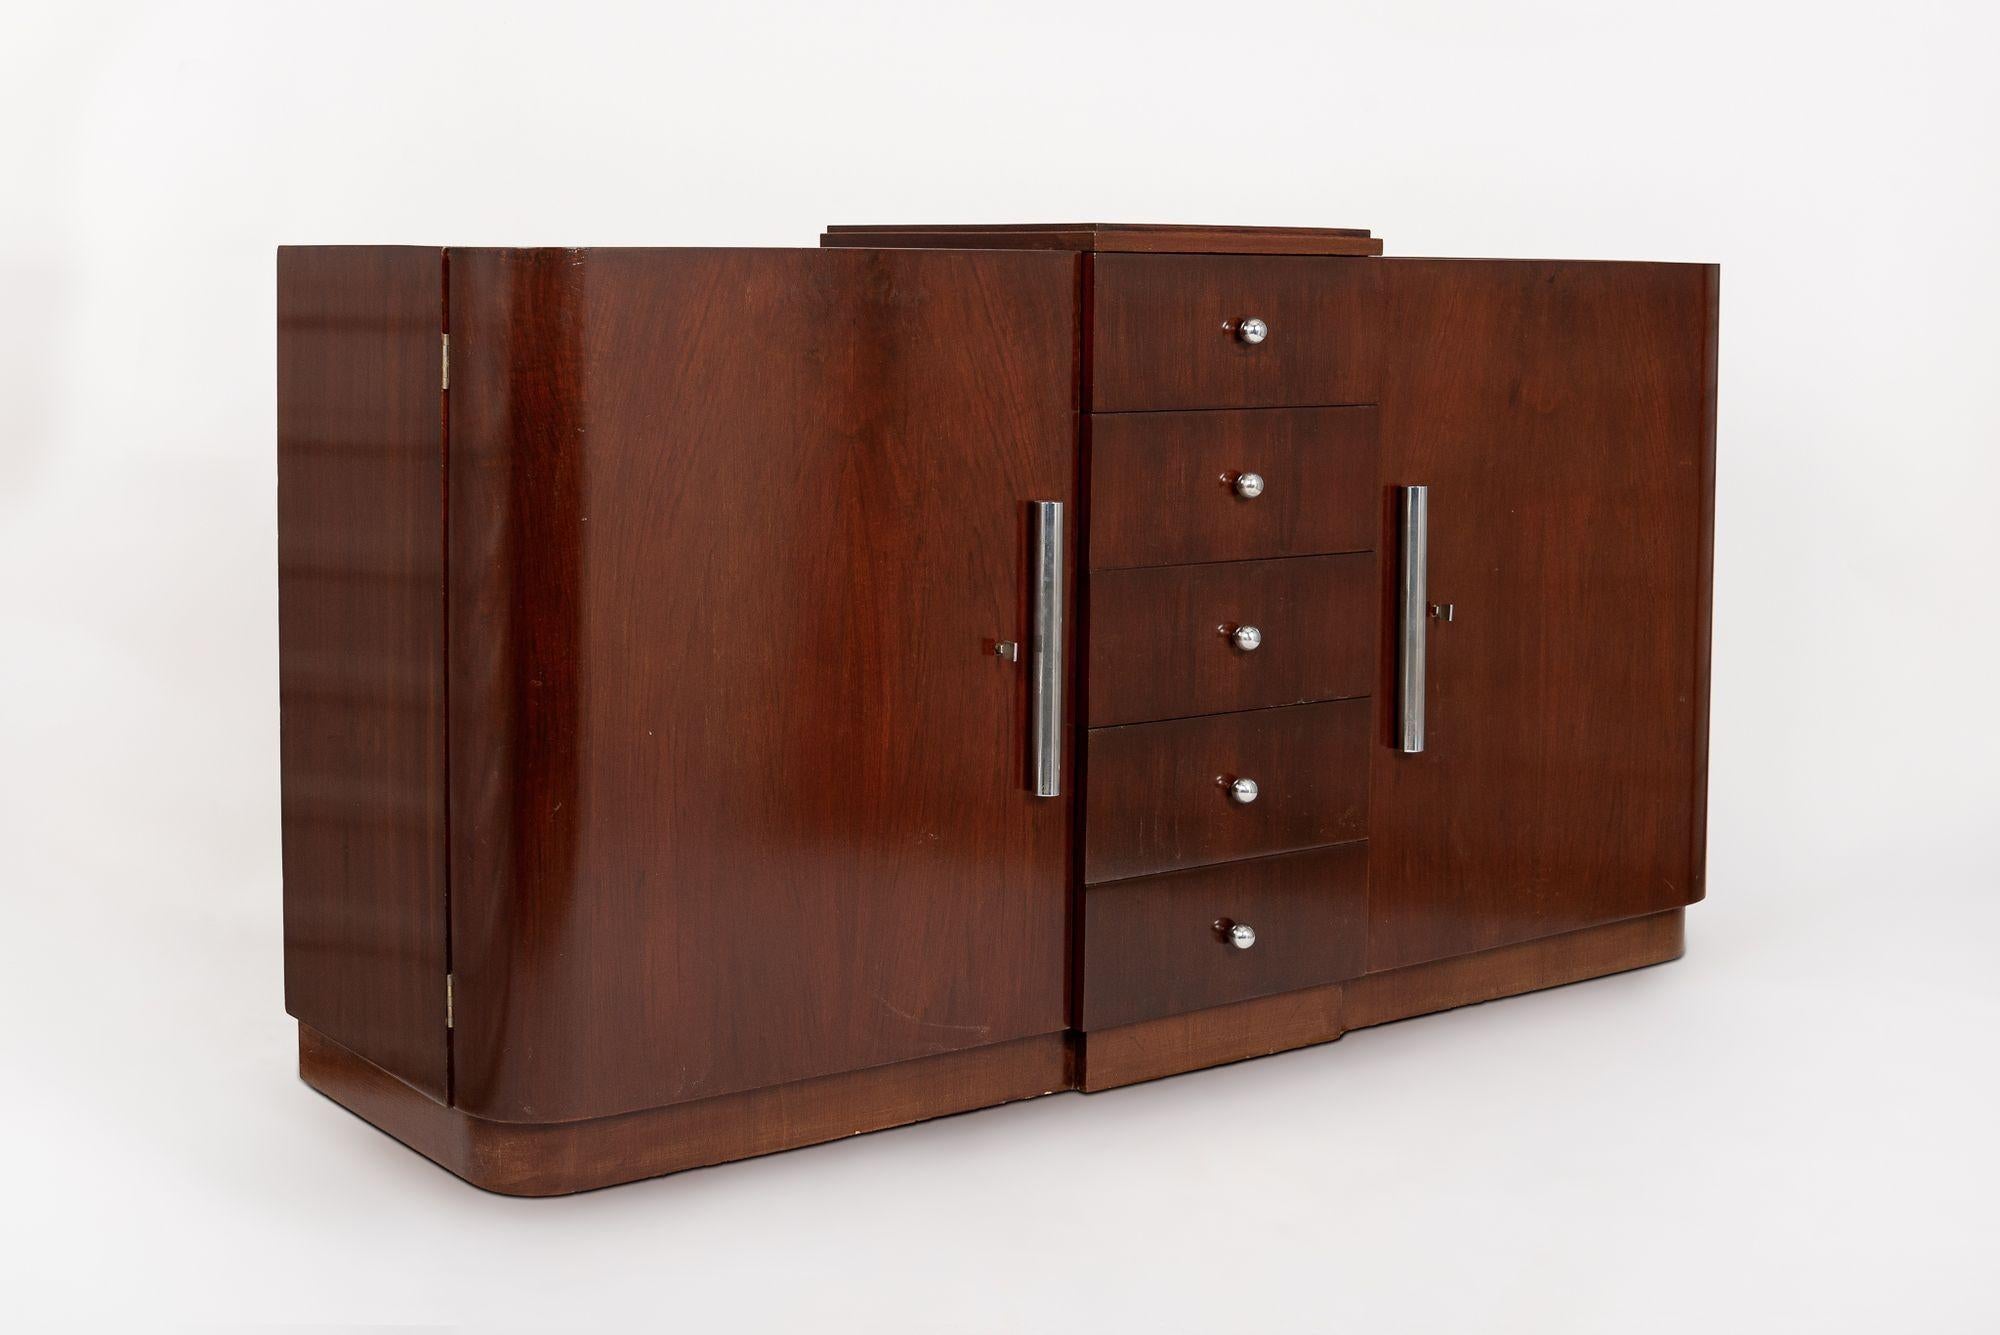 This exquisite French Art Deco mahogany wood sideboard or credenza was made Mercier Frères in Paris, France circa 1930. The wooden cabinet is expertly handcrafted and features a streamline Art Deco design with simple lines and gentle curves. The